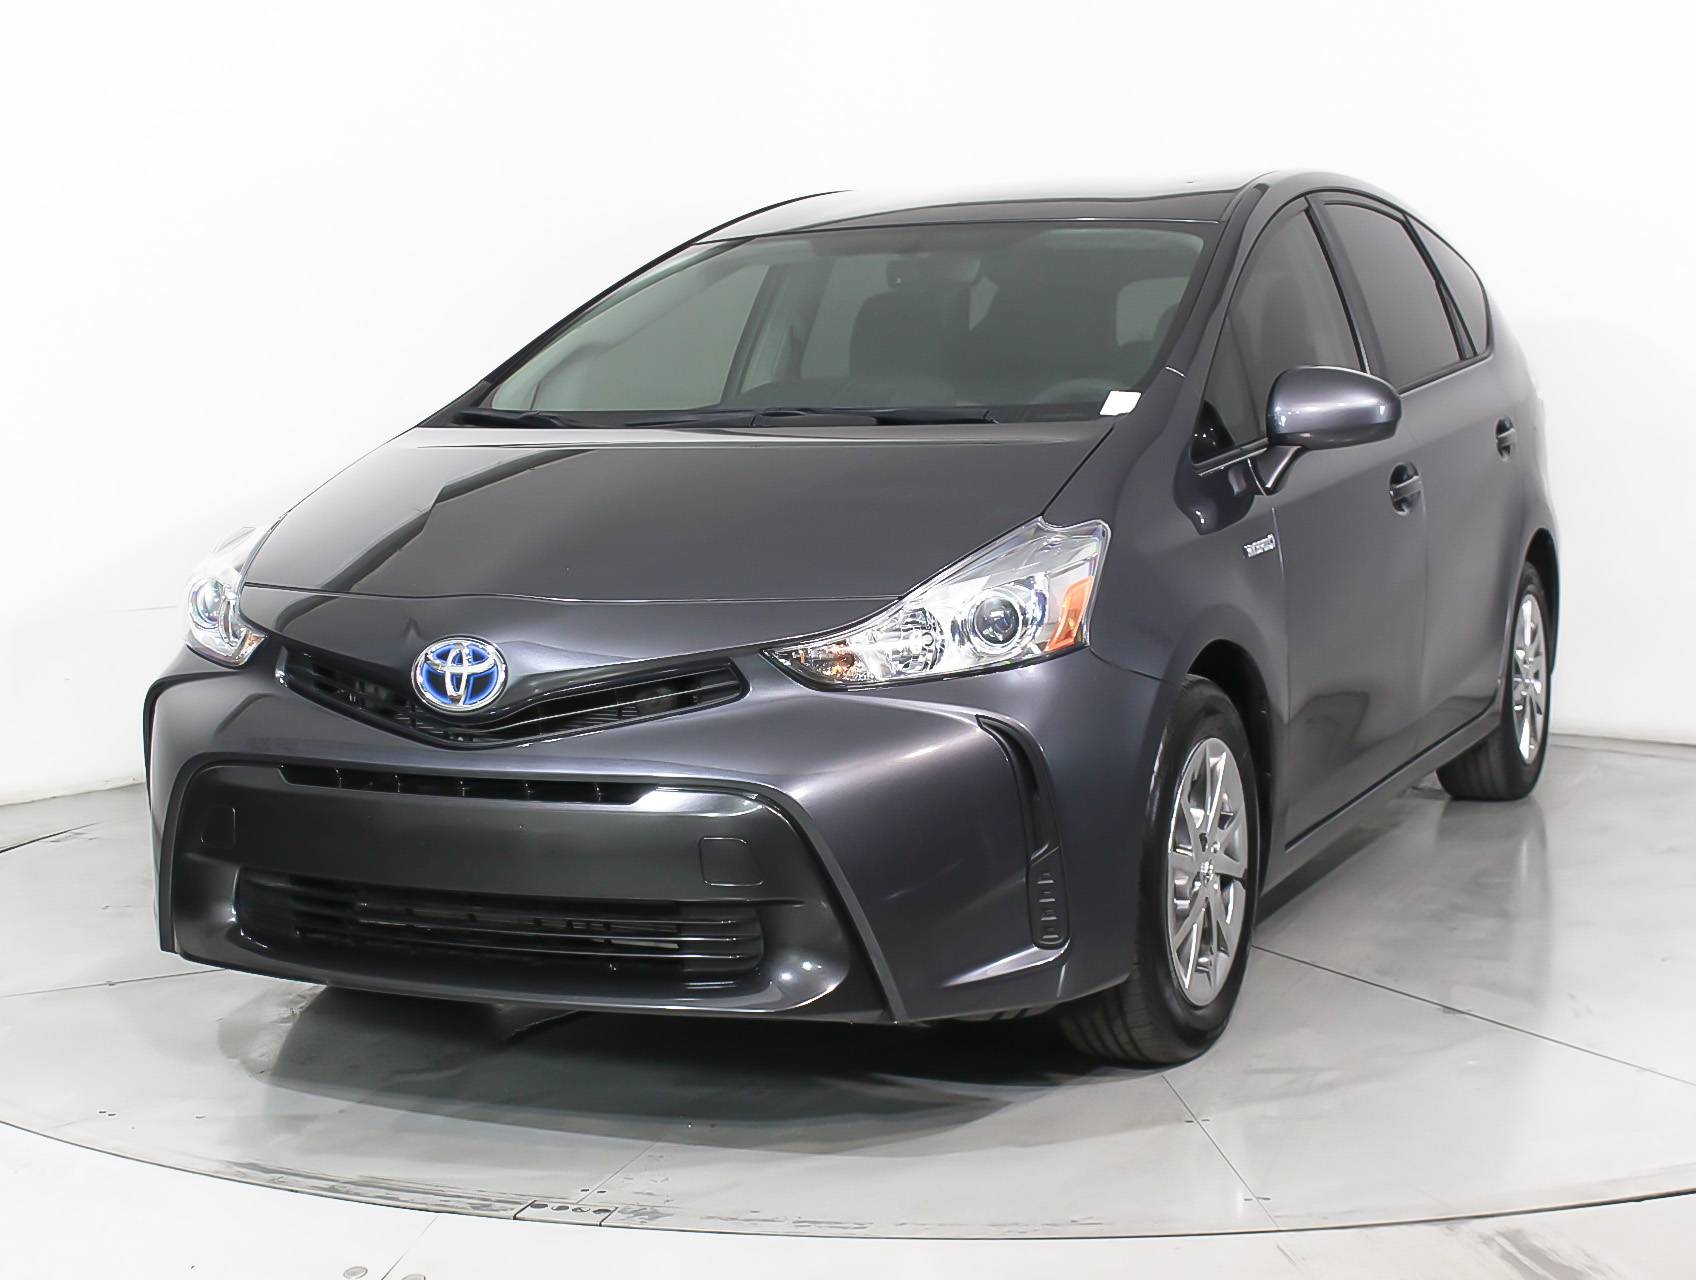 Used 2015 TOYOTA PRIUS V TWO for sale in MIAMI | 102627